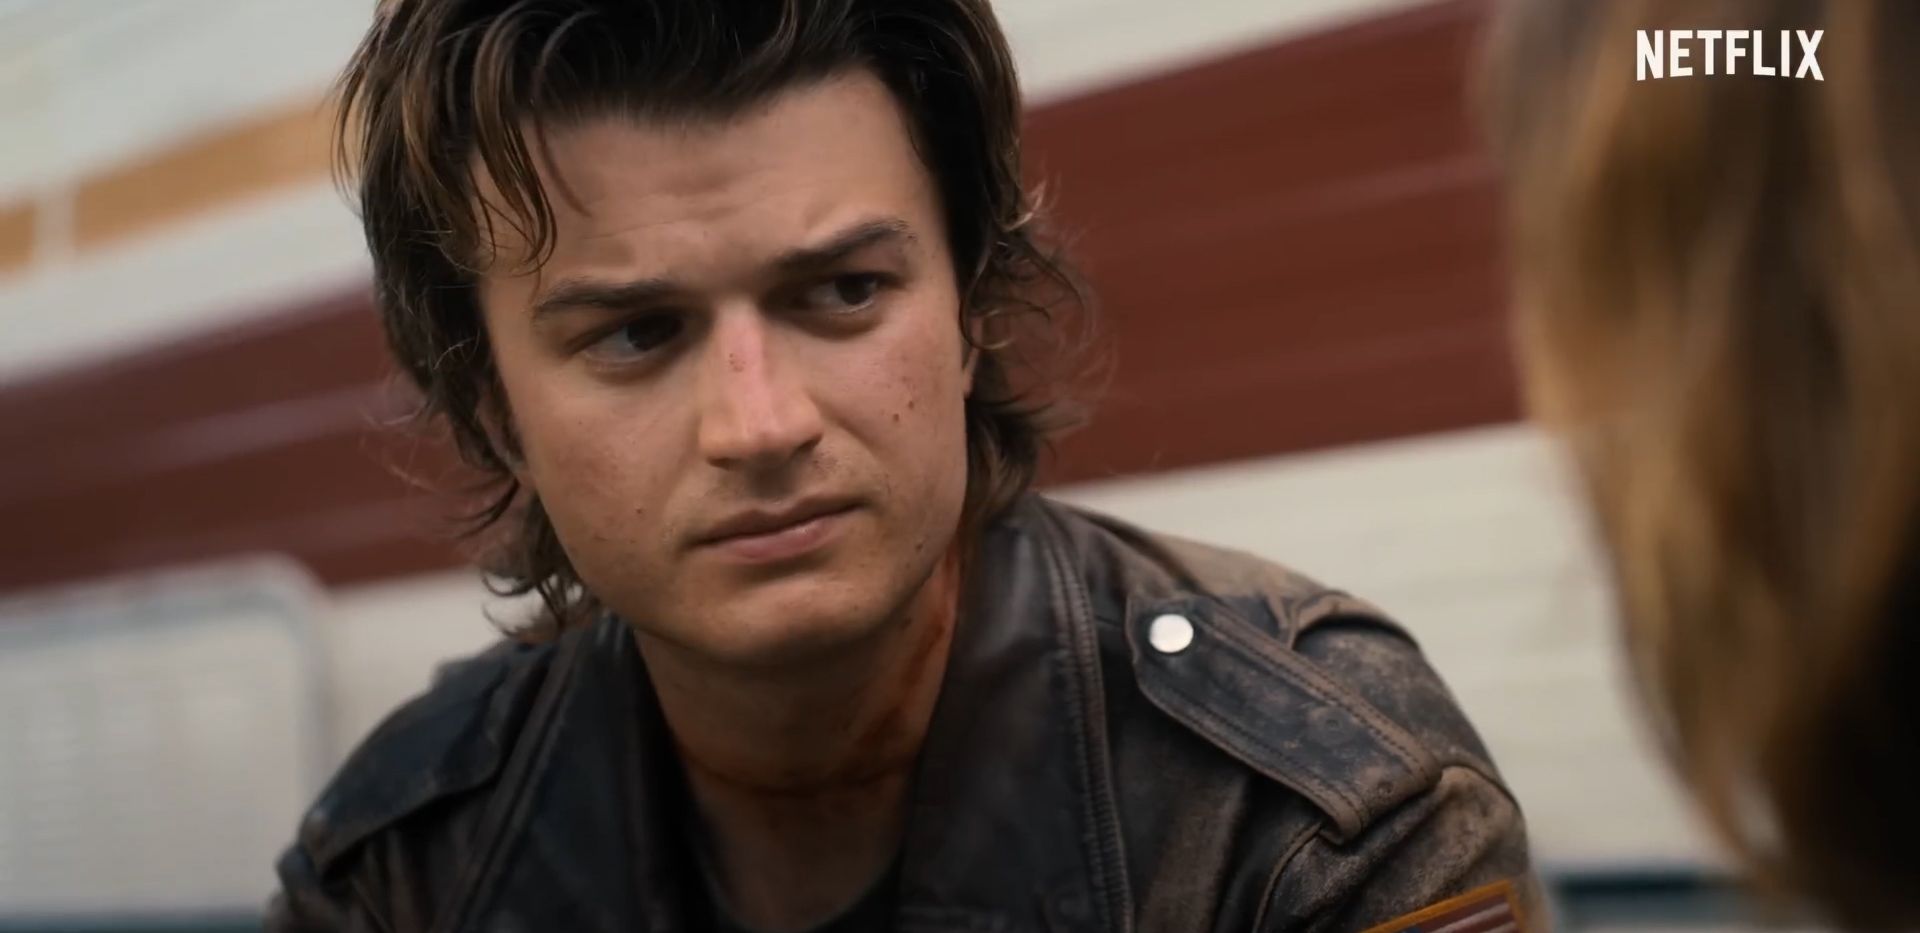 Stranger Things actor Joe Keery launches new solo music as Djo